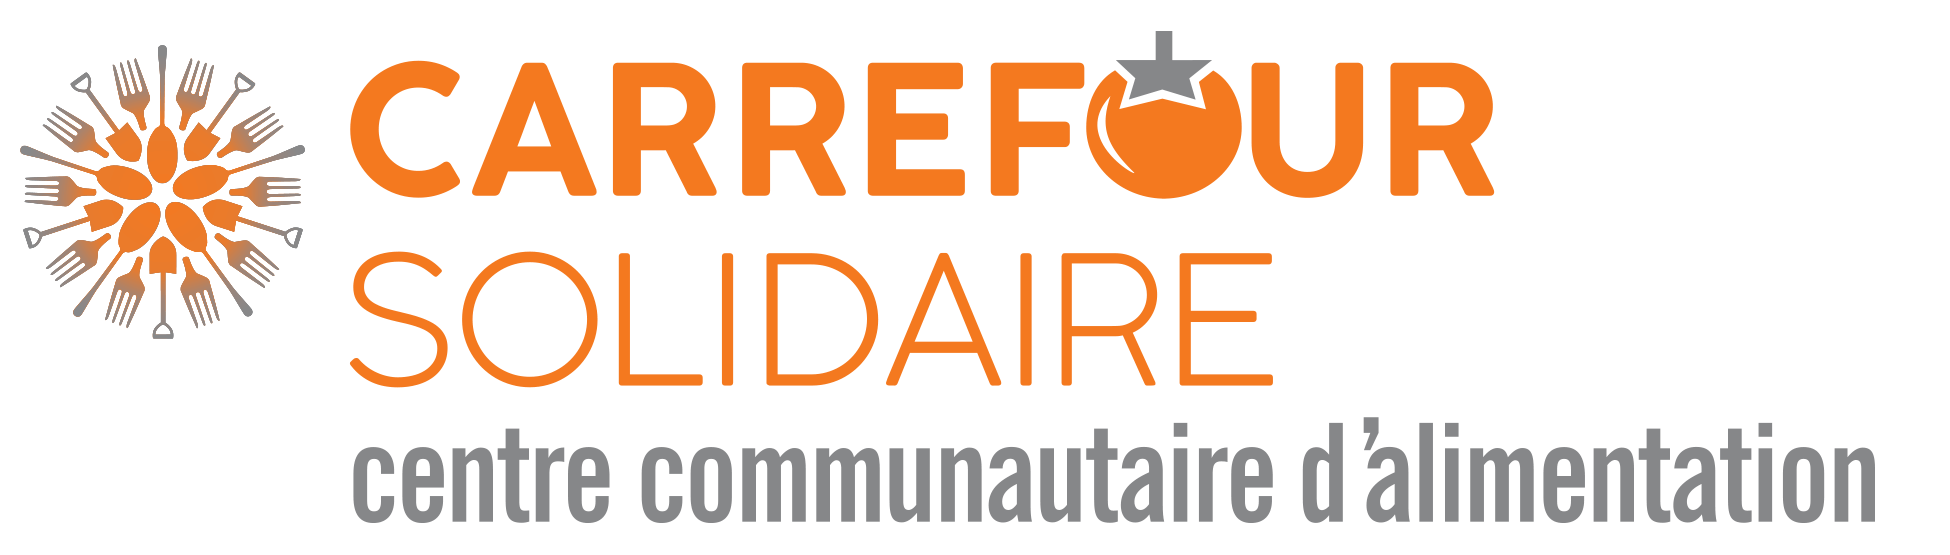 Carrefour solidaire CCA